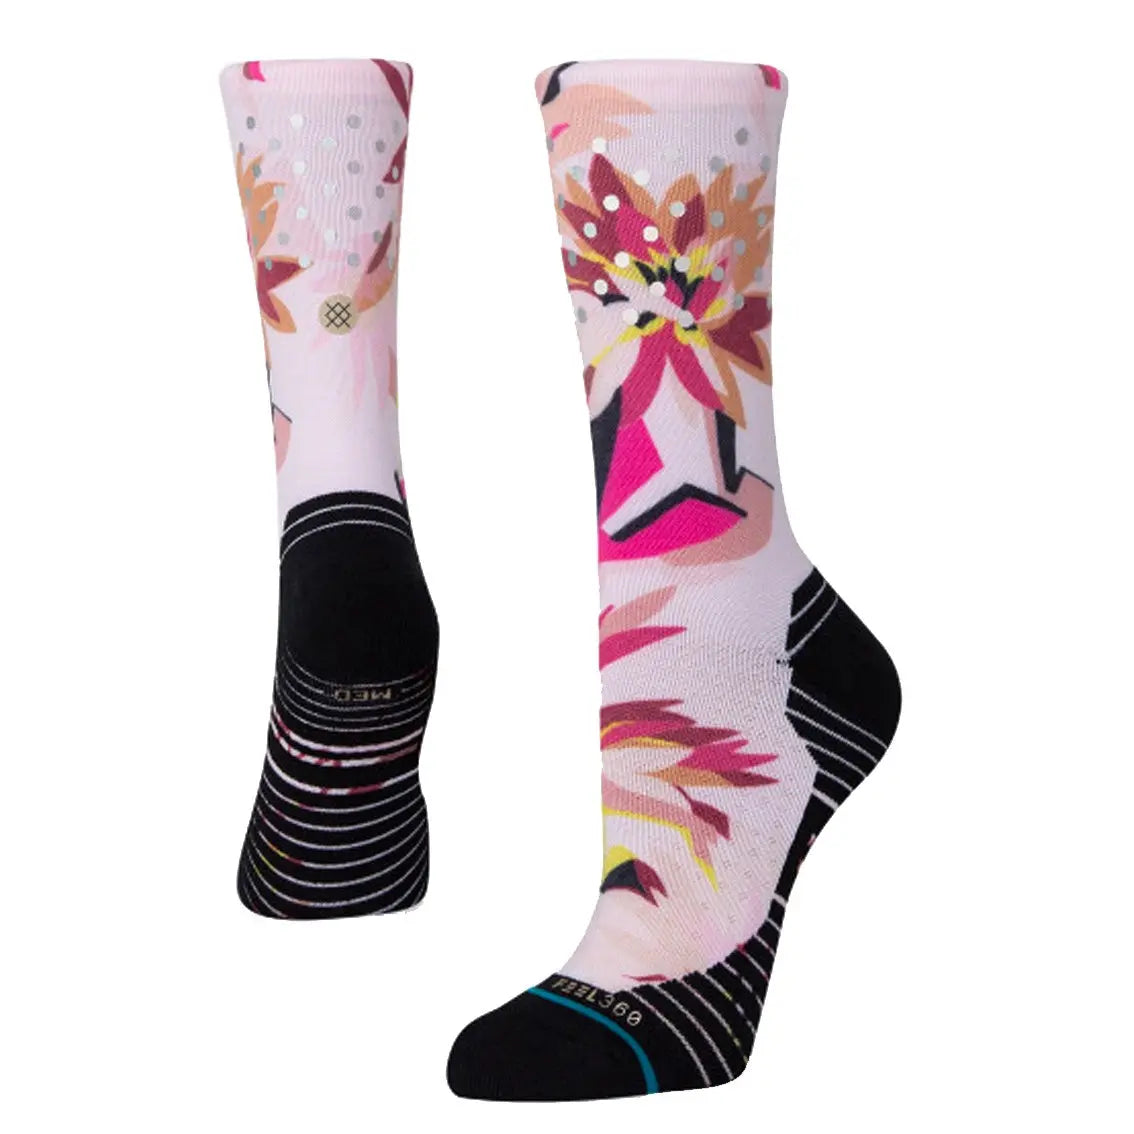 Womens Stance Performance Crew Sock - White / Pink / Silver